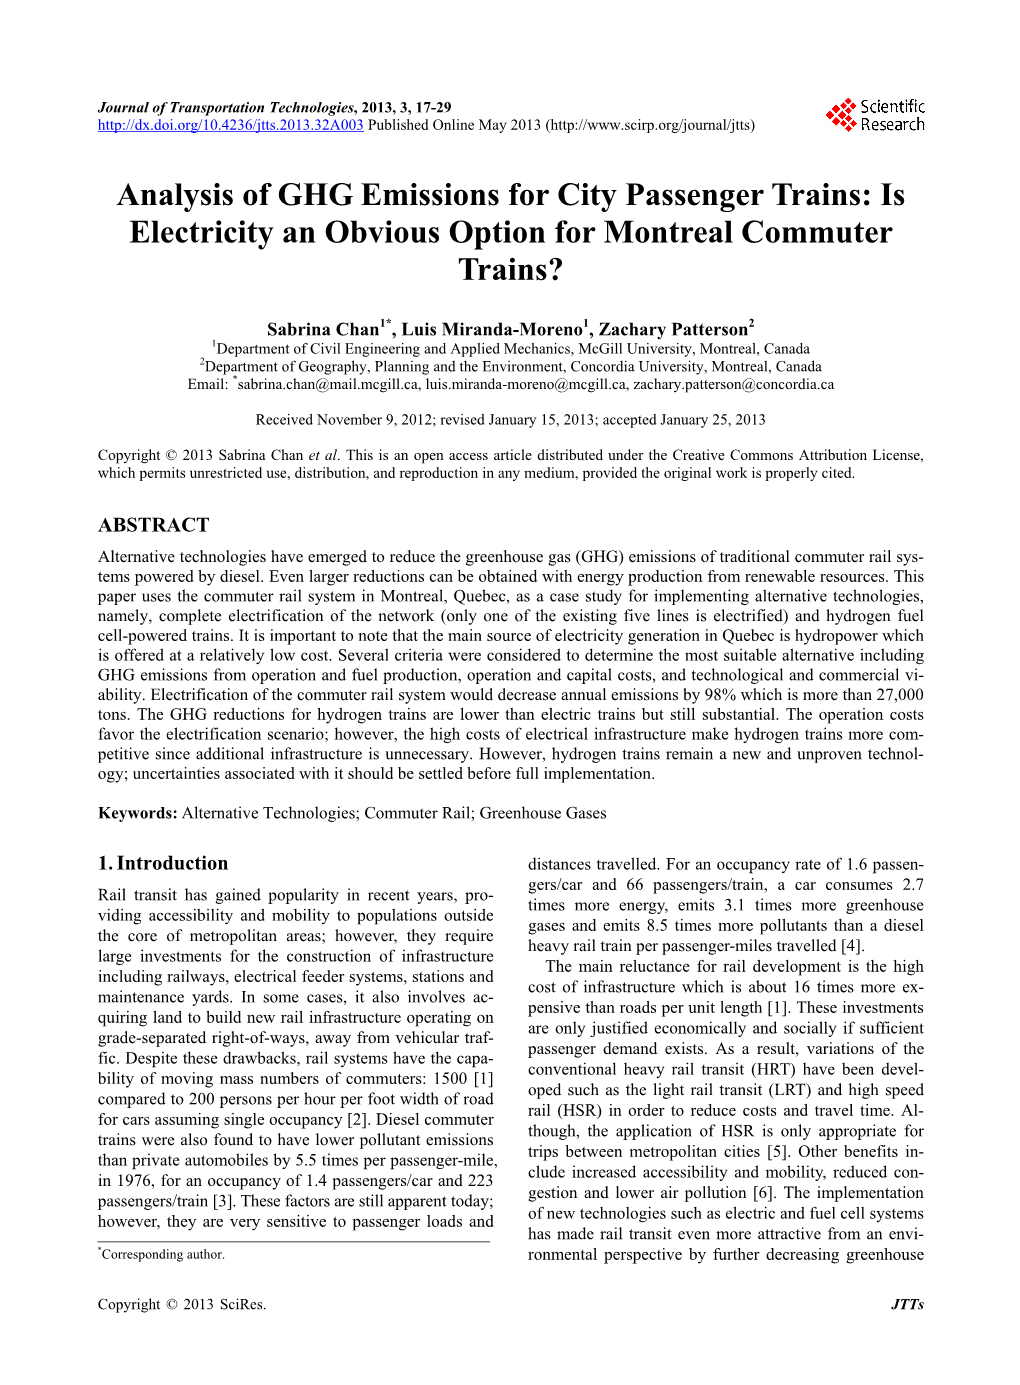 Analysis of GHG Emissions for City Passenger Trains: Is Electricity an Obvious Option for Montreal Commuter Trains?